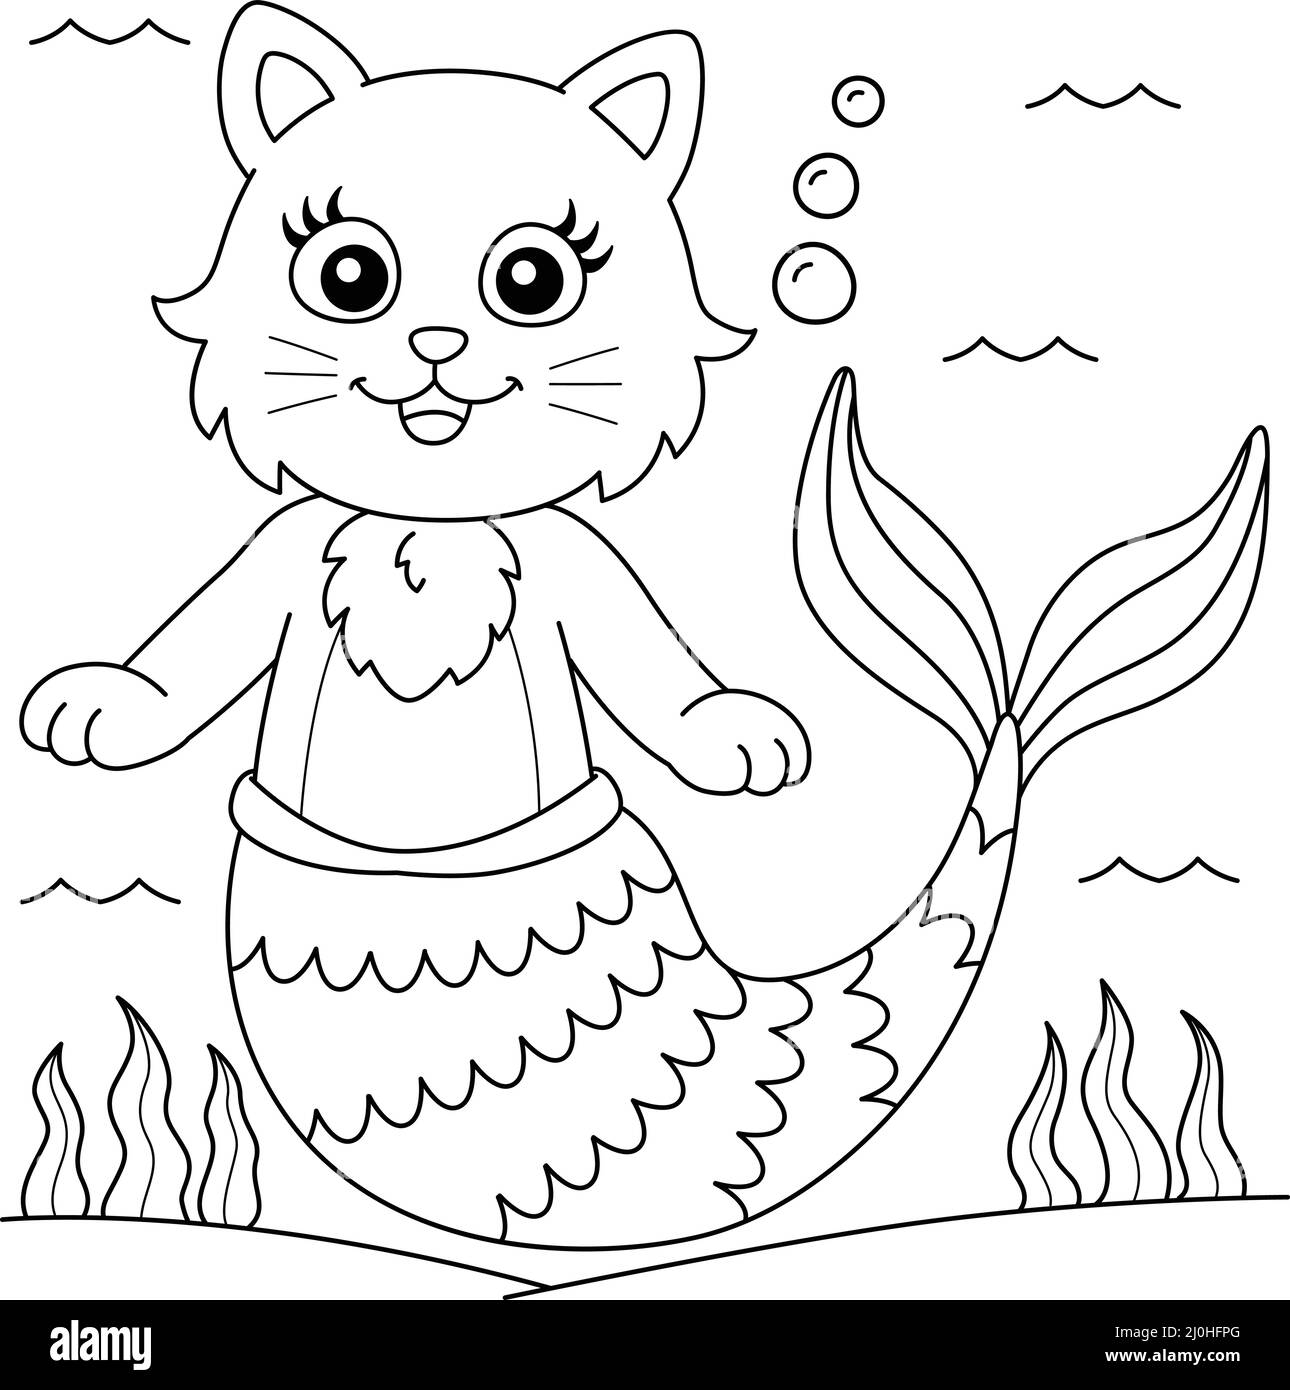 Cat Mermaid Coloring Page for Kids Stock Vector Image & Art   Alamy